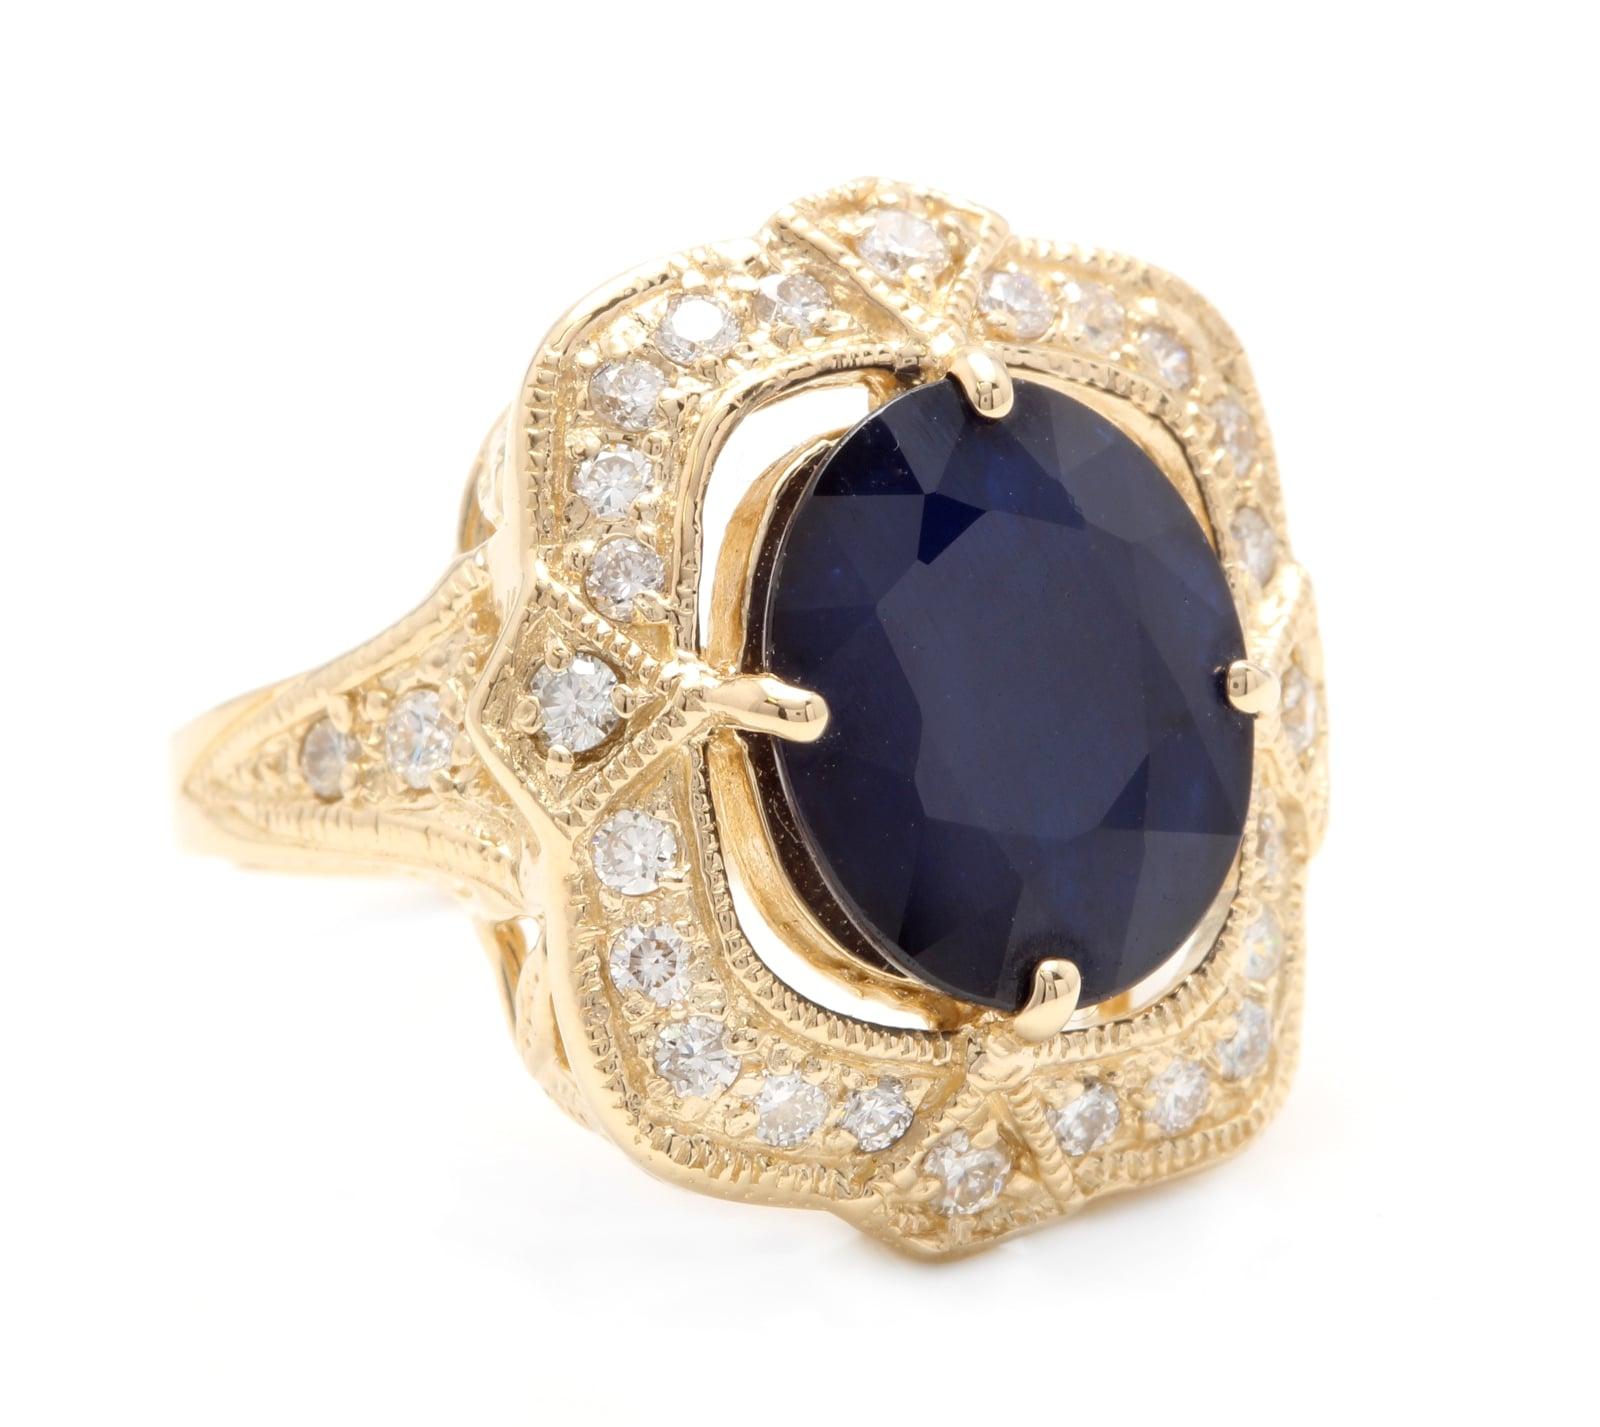 6.70 Carats Exquisite Natural Blue Sapphire and Diamond 14K Solid Yellow Gold Ring

Total Natural Blue Sapphire Weights: Approx. 6.00 Carats

Sapphire Measures: Approx. 13.00 x 10.00mm

Sapphire Treatment: Diffusion

Natural Round Diamonds Weight: